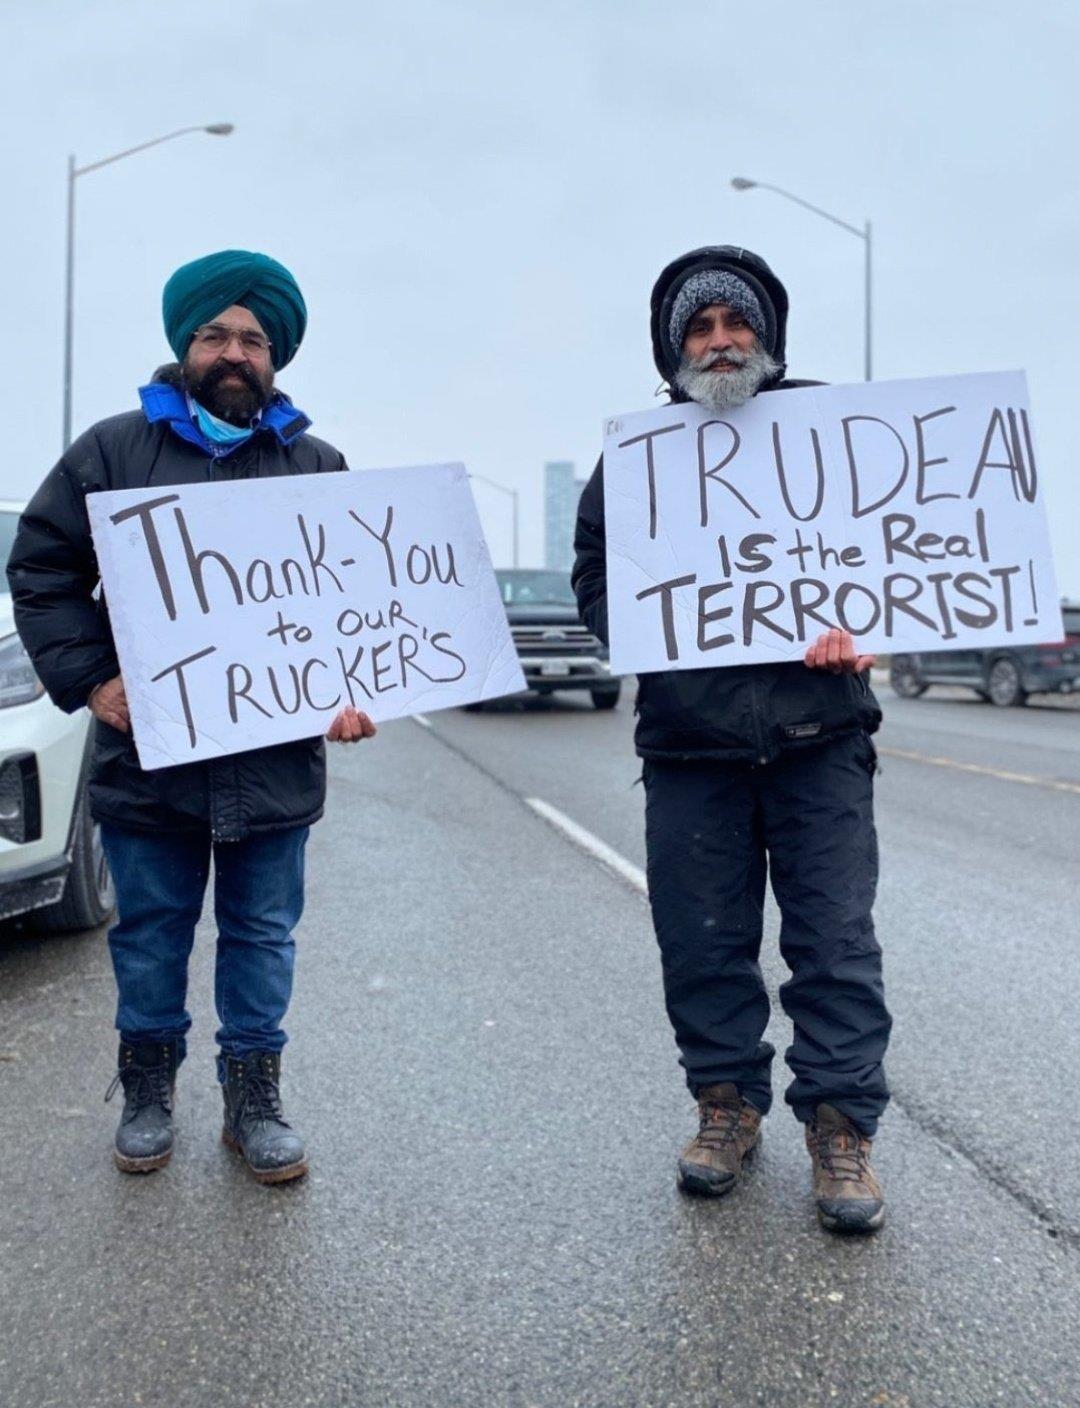 Sikhs, who represent major share of truckers, protest against Canada's vaccine mandates as Trudeau and his family leave their Ottawa home